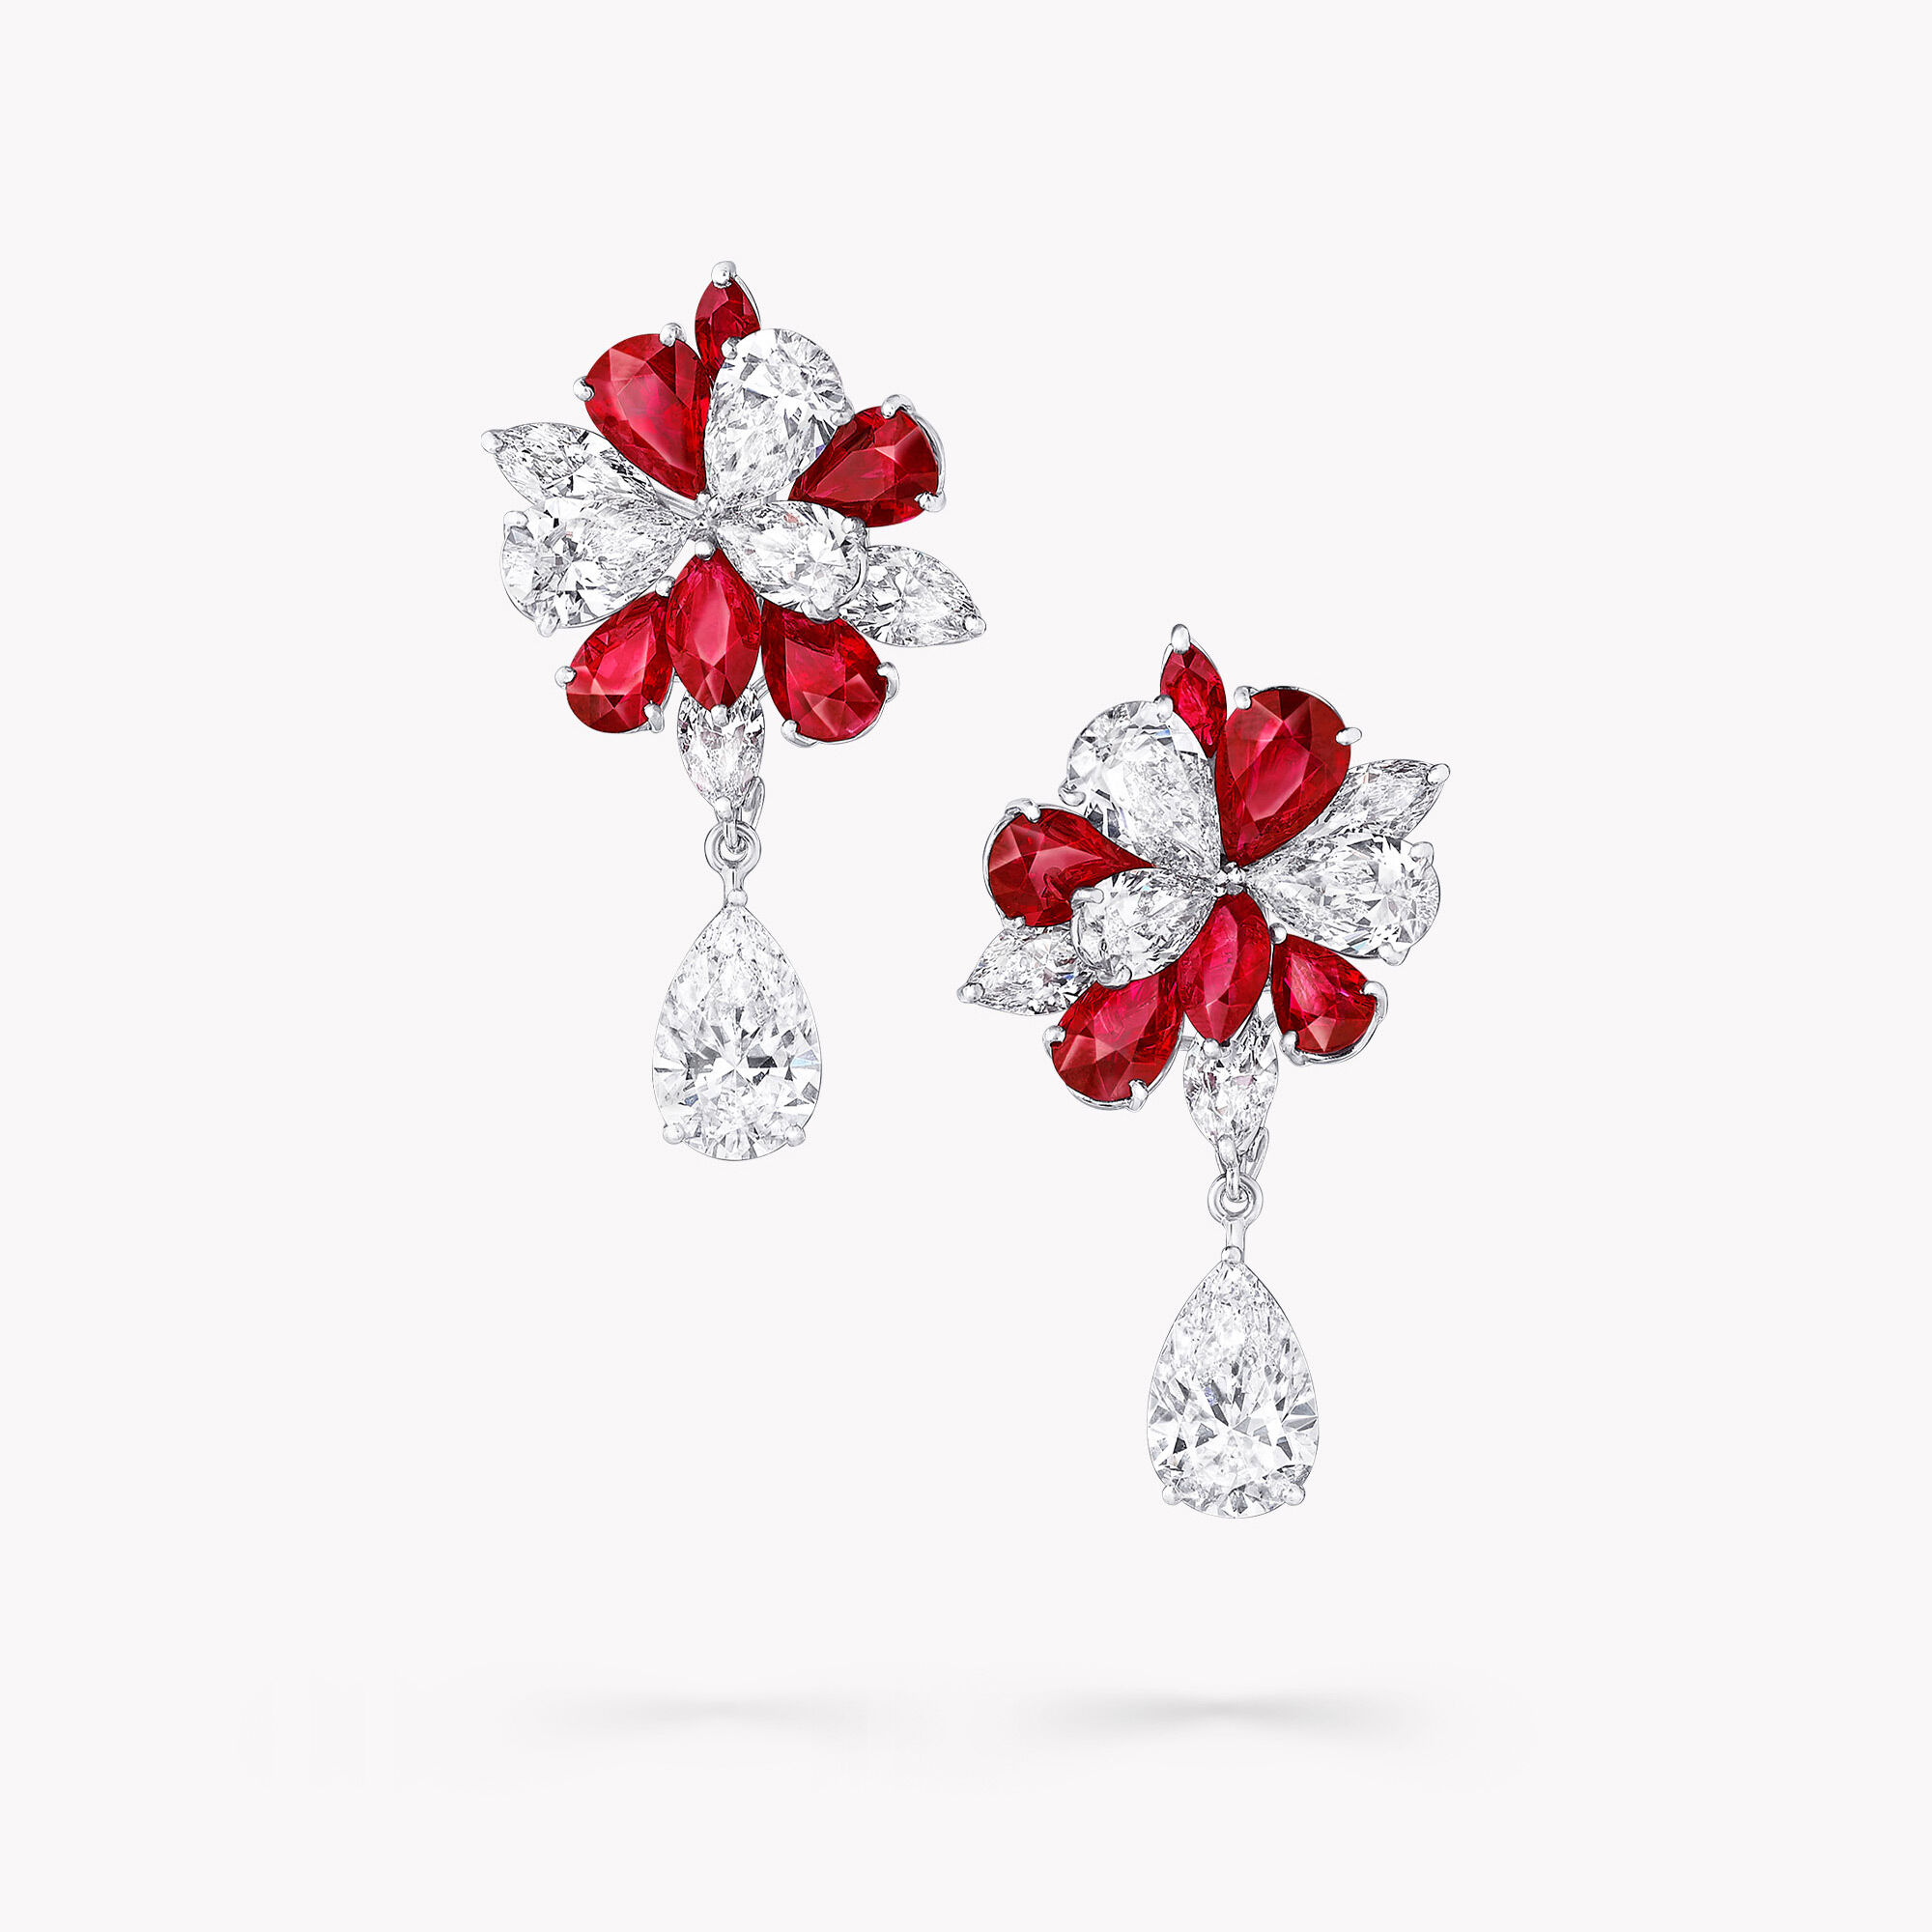 A pair of Graff ruby and white diamond high jewellery earrings